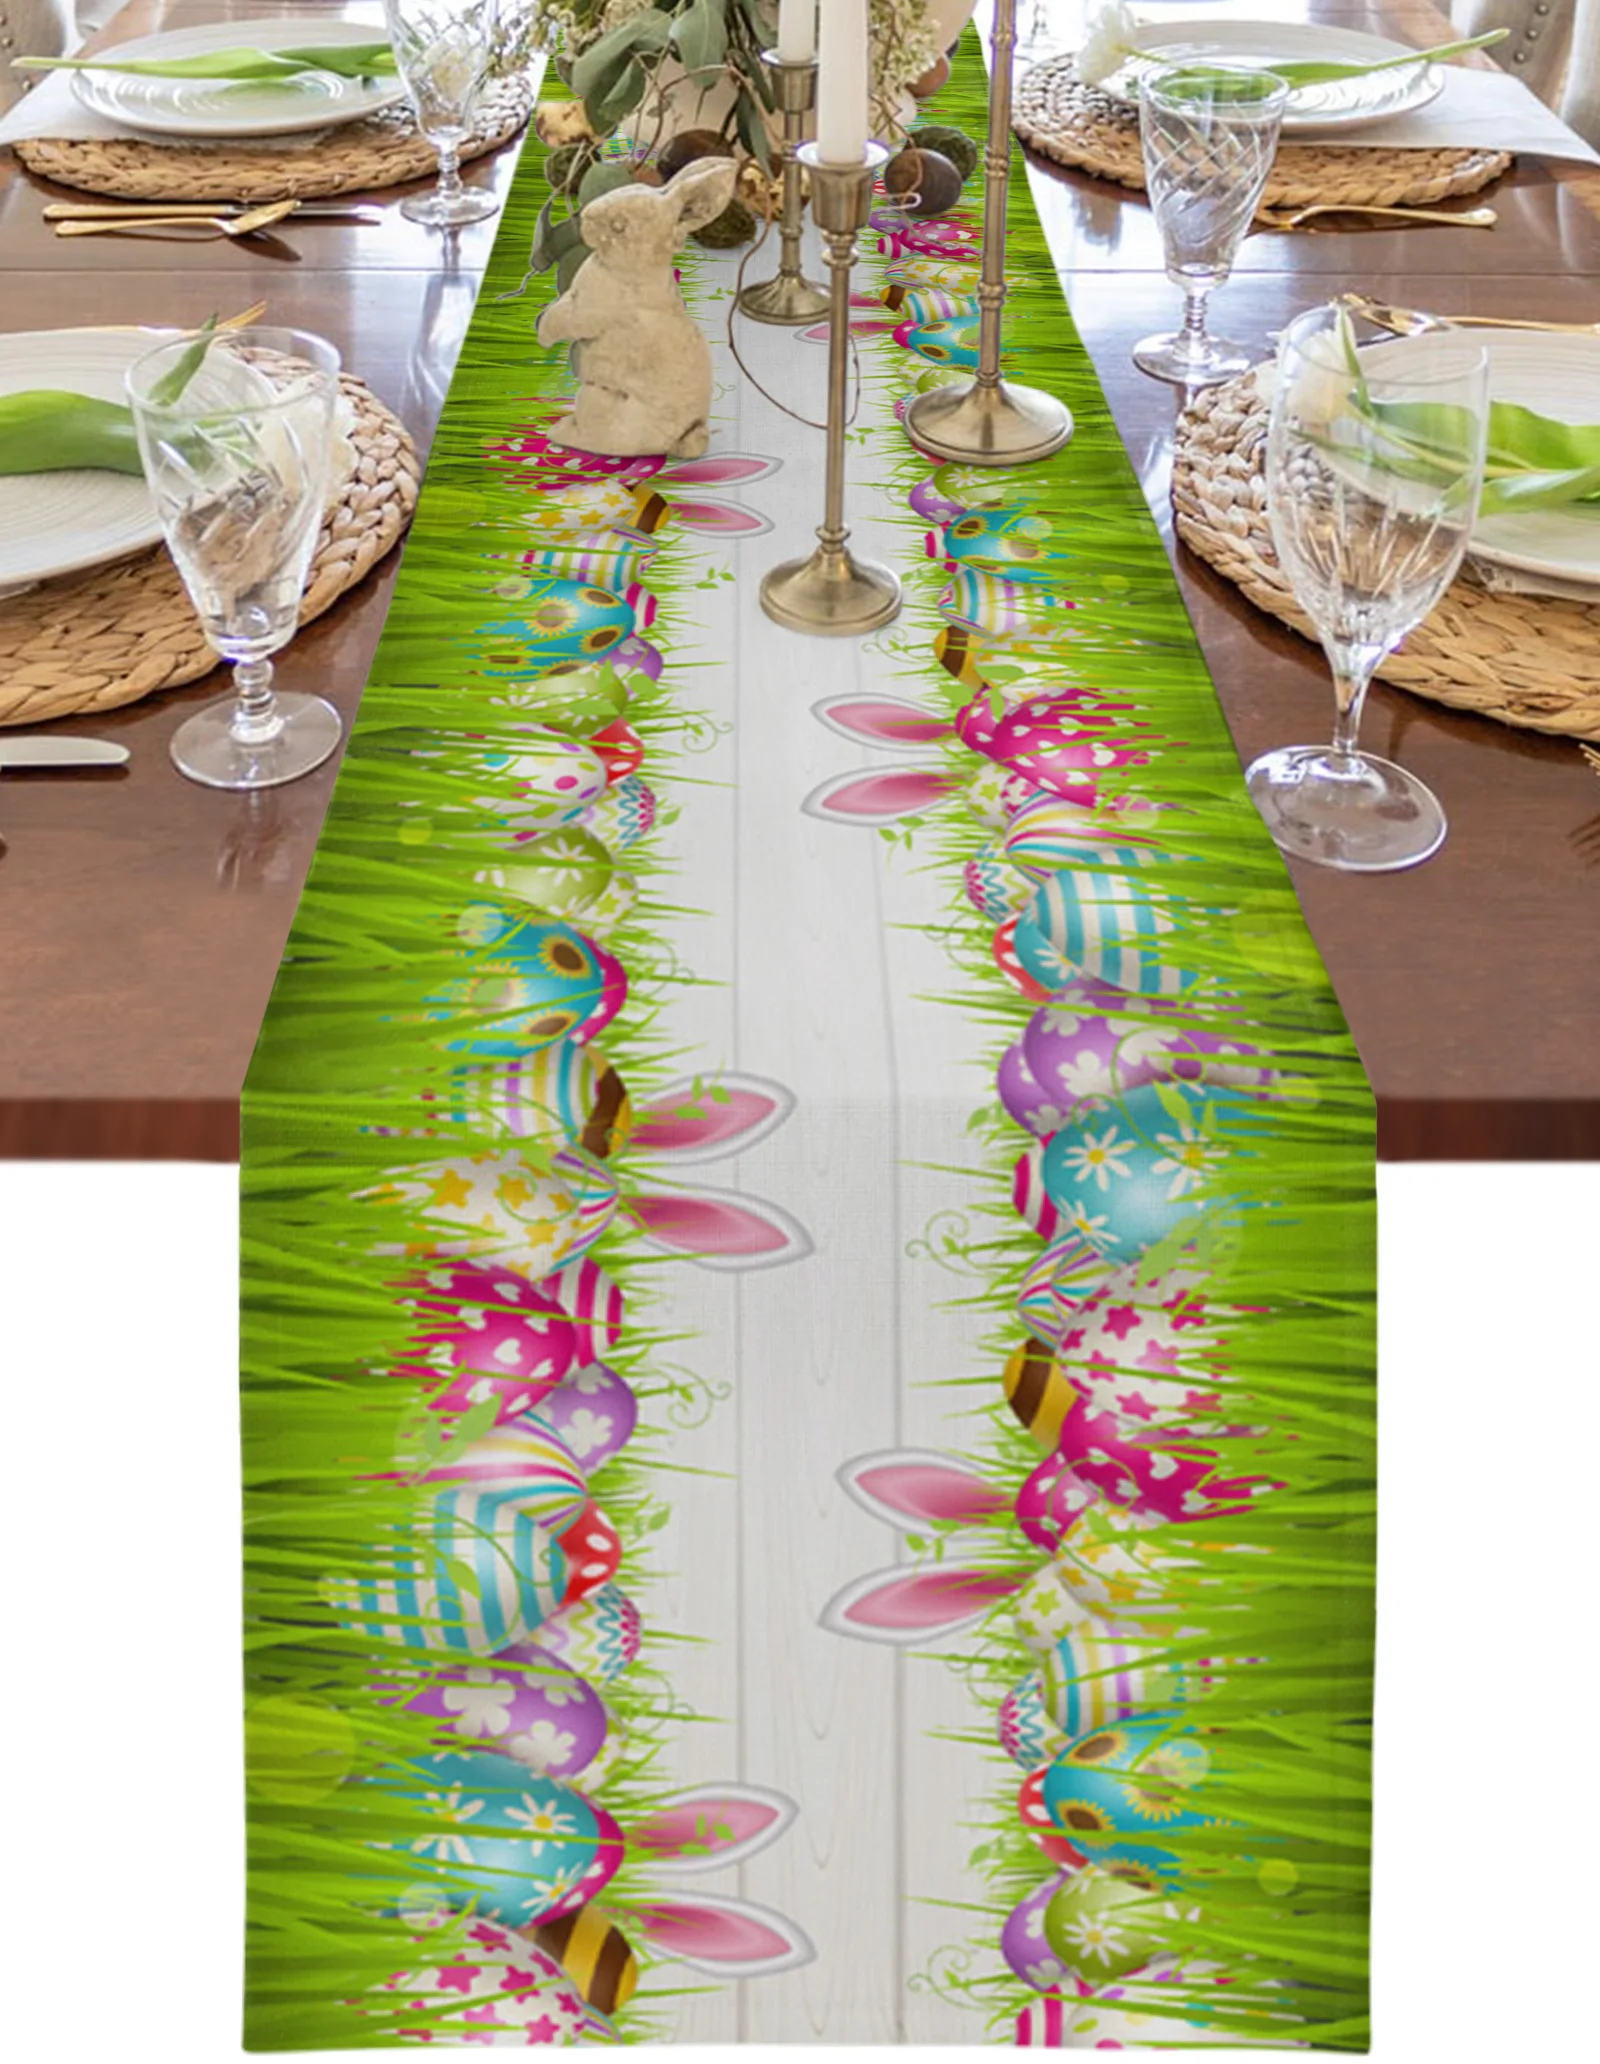 

Easter Eggs Rabbit Ears Grass Printed Table Runner Wedding Party Table Decorations for Home Decor Gift Favor Placemat Tablecloth